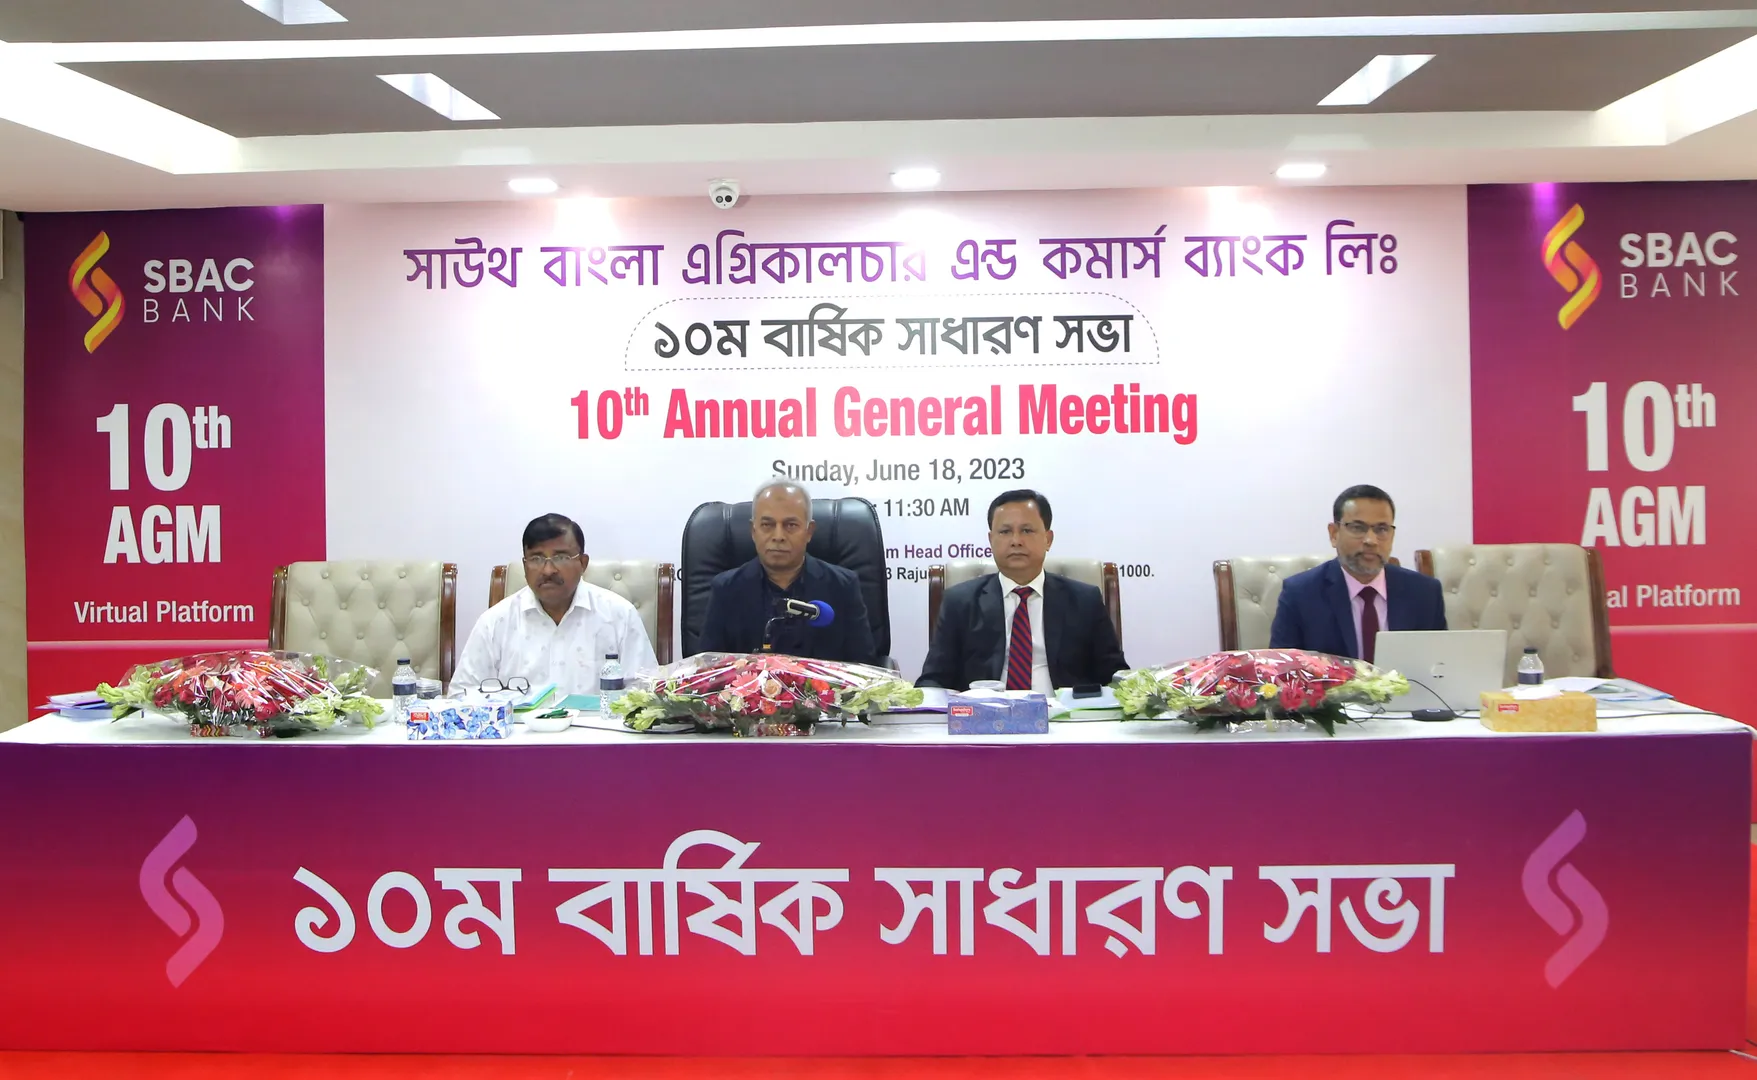 The 10th Annual General Meeting (AGM) of SBAC Bank Limited